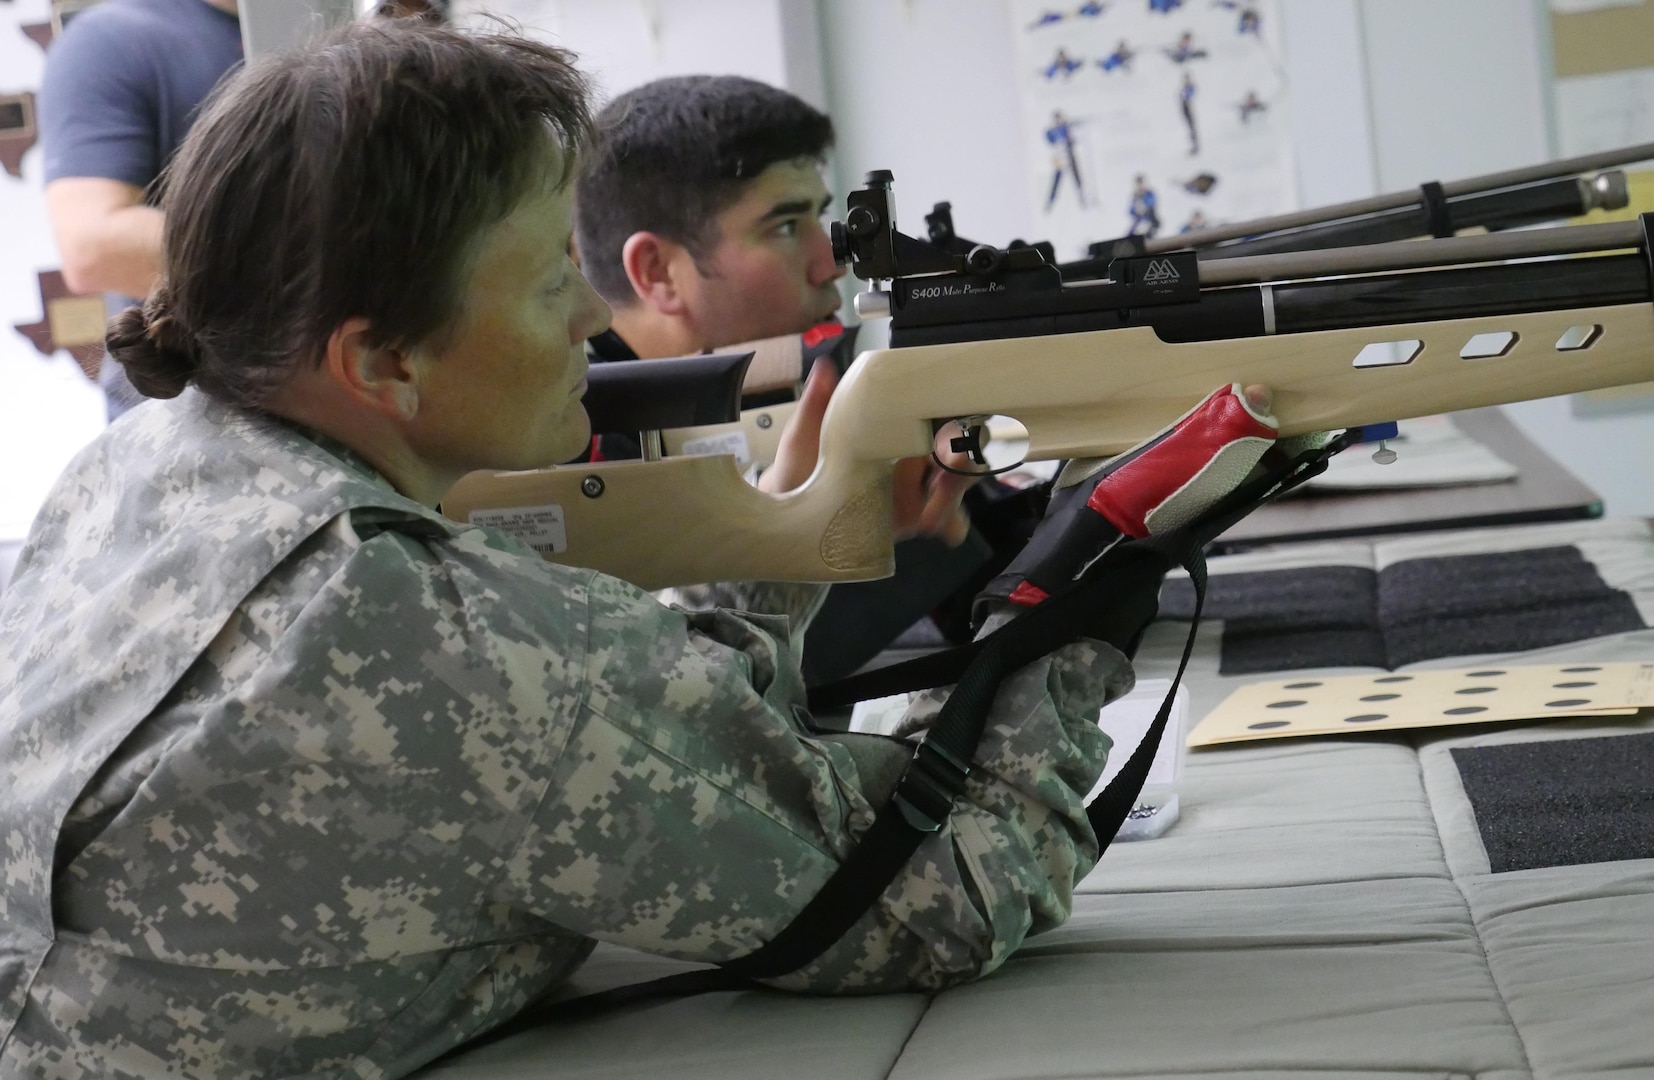 U.S. Army Staff Sgt. Tiffany Rodriguez-Rexroad, Bravo Company, Warrior Transition Battalion, Brooke Army Medical Center, inspects her air rifle before firing during a training session at Central Catholic High School, San Antonio, Texas, Nov. 10, 2016. The training is part of the WTB’s adaptive reconditioning program.  (U.S. Army photo by Robert A. Whetstone/Released)